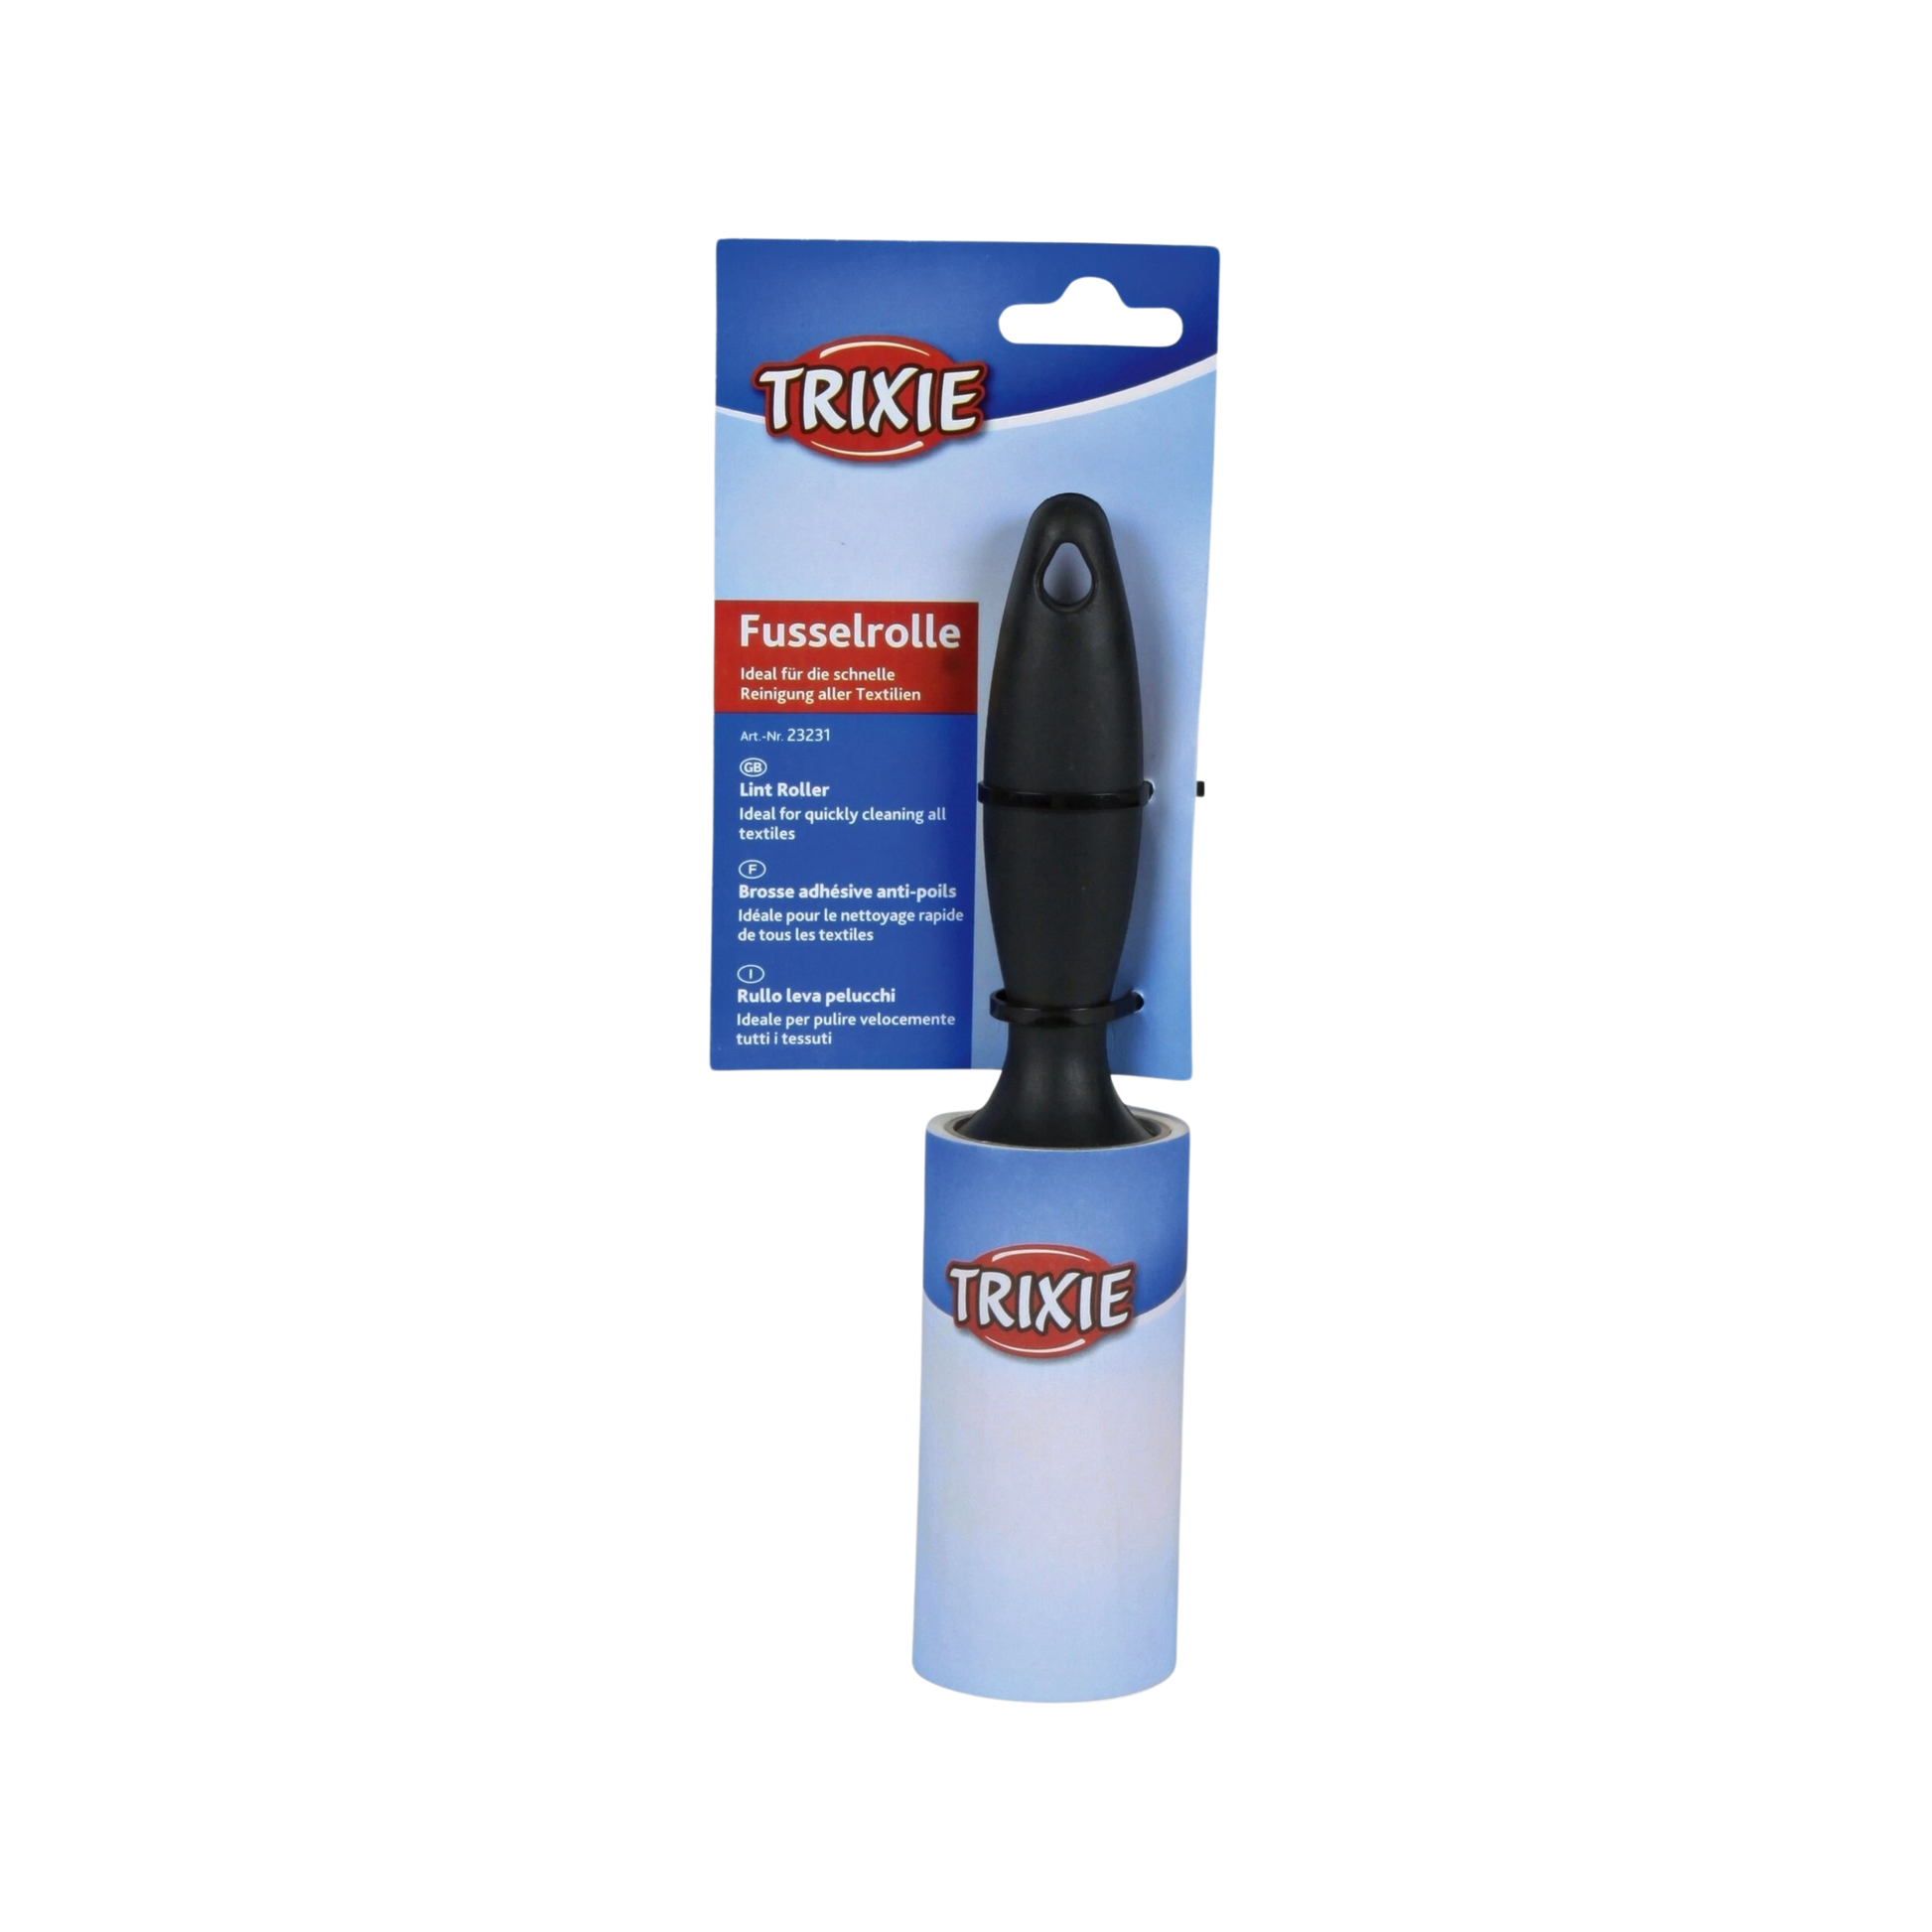 TRIXIE LINT ROLLER 60 SHEETS ROLL 60PCS